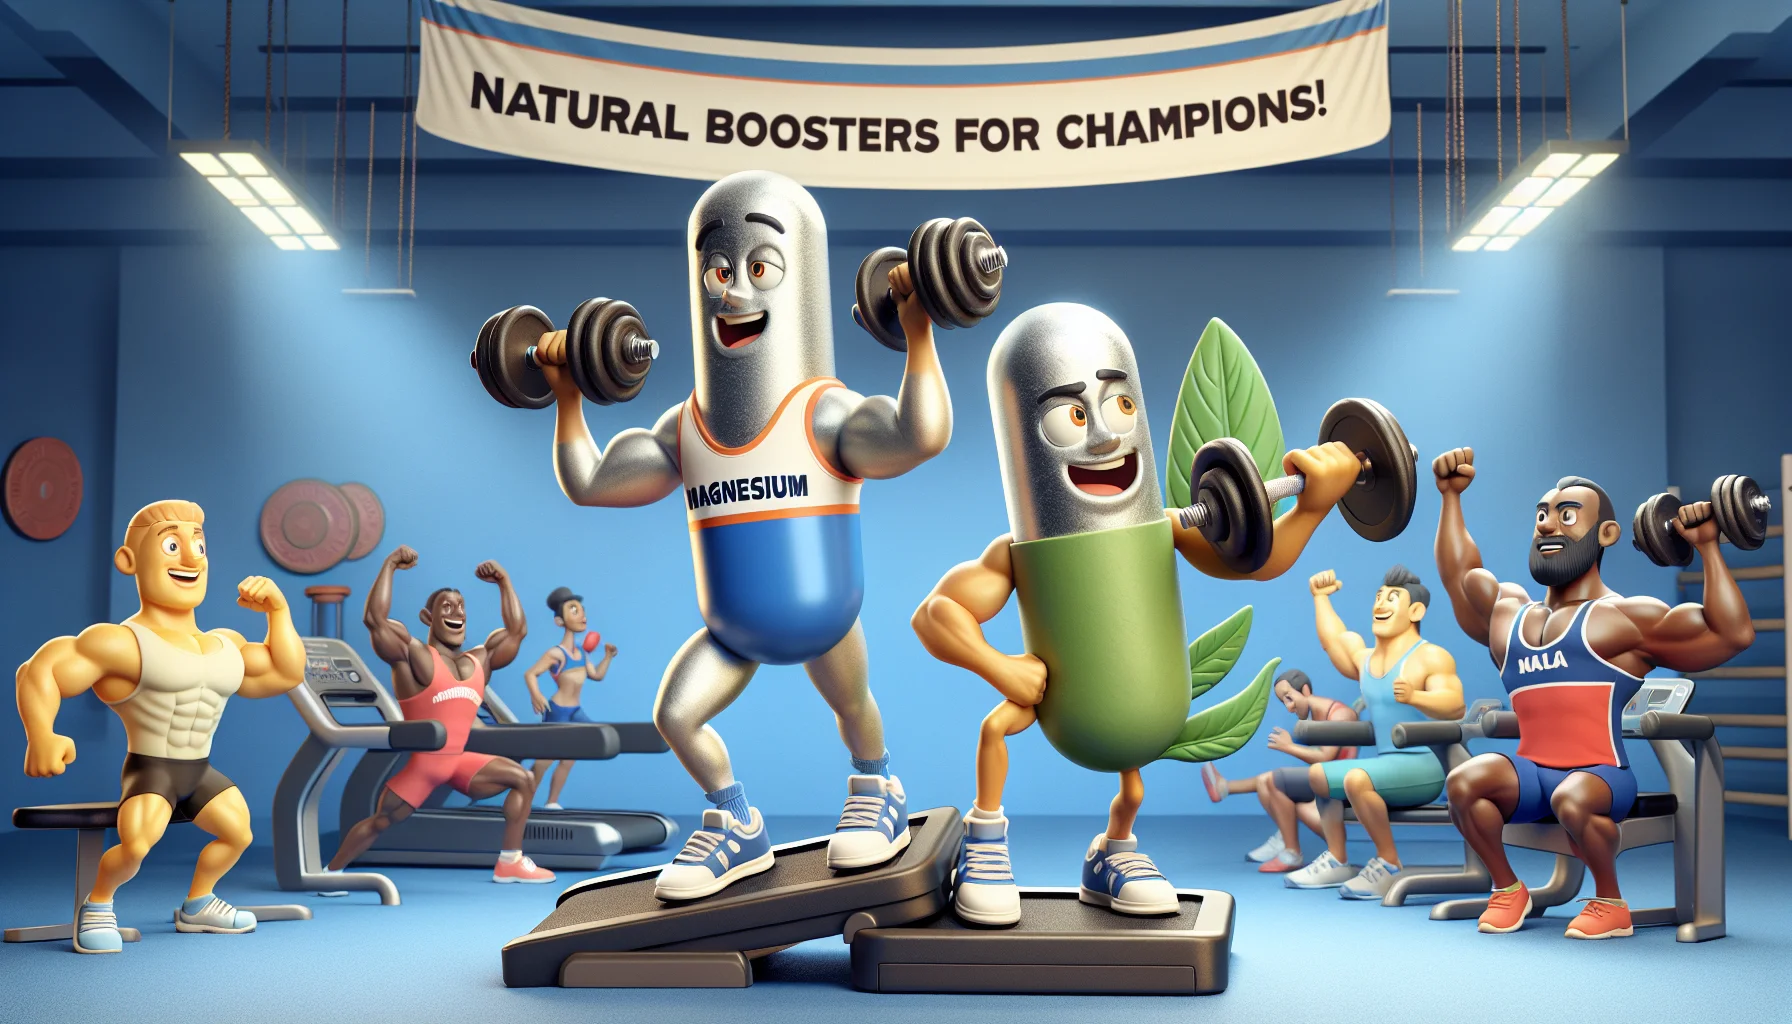 An image that humorously promotes the benefits of magnesium and ashwagandha supplements for sports enthusiasts. In a gym setting, we see a magnesium pill, anthropomorphized with arms and legs, confidently lifting heavy dumbbells. Next to it is an ashwagandha pill, also anthropomorphized, running swiftly on a treadmill. Both pills are wearing sports attire and showing exaggerated muscular forms, implying their contribution to enhanced physical performance. They are surrounded by an audience of other supplement pills, all cheering, in a fun atmosphere. An overhead banner reads 'Natural Boosters for Champions!'. The message conveys the potential improved stamina and recovery that these supplements can provide to athletes.